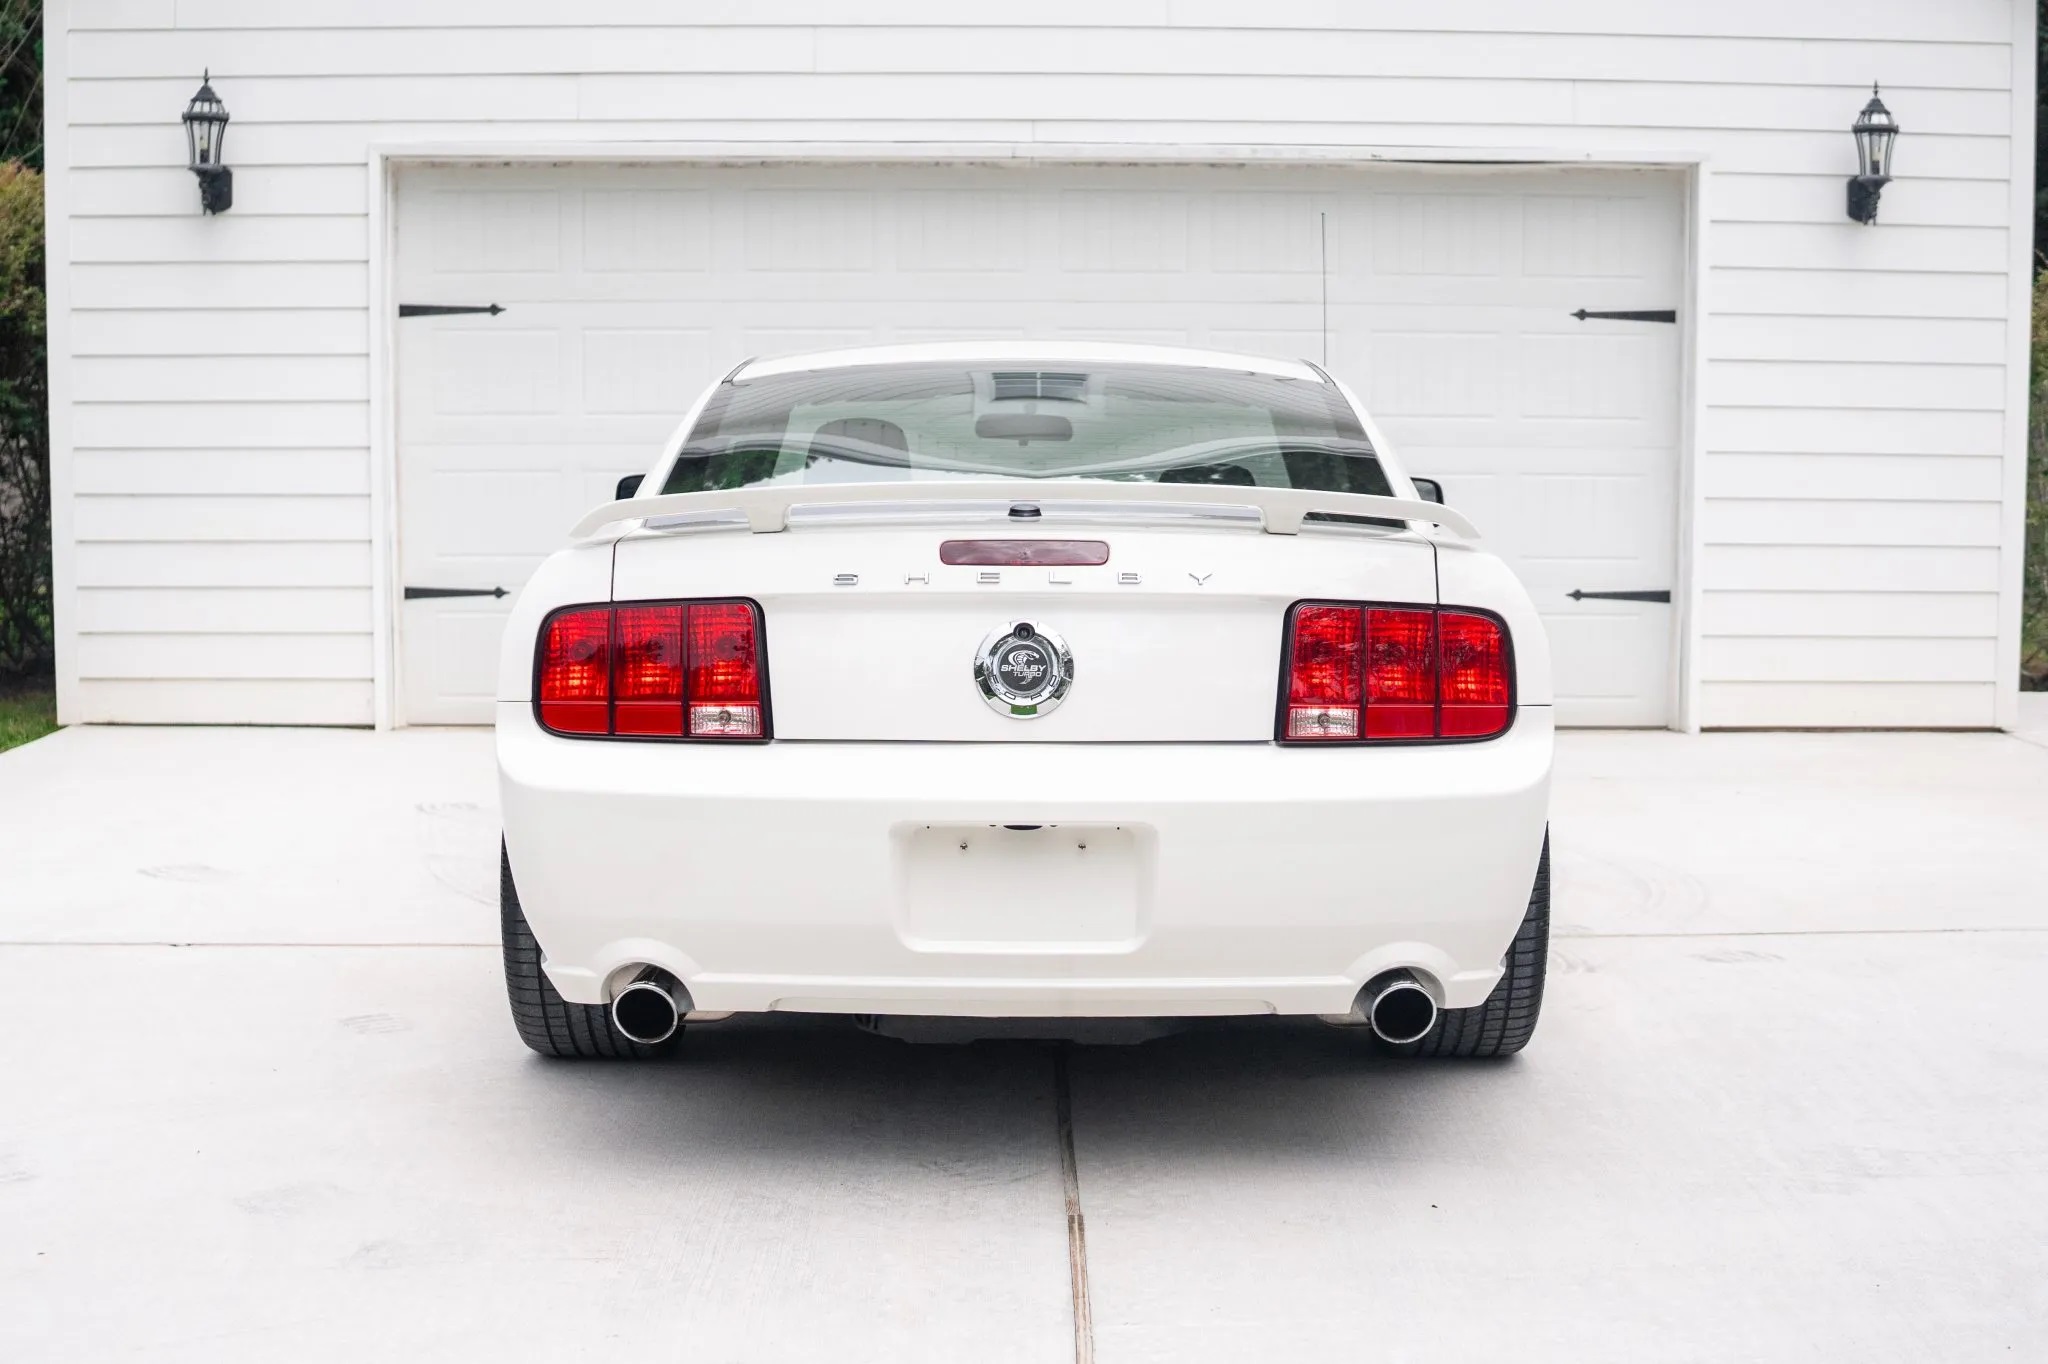 2008 Ford Mustang Shelby Turbo Prototype